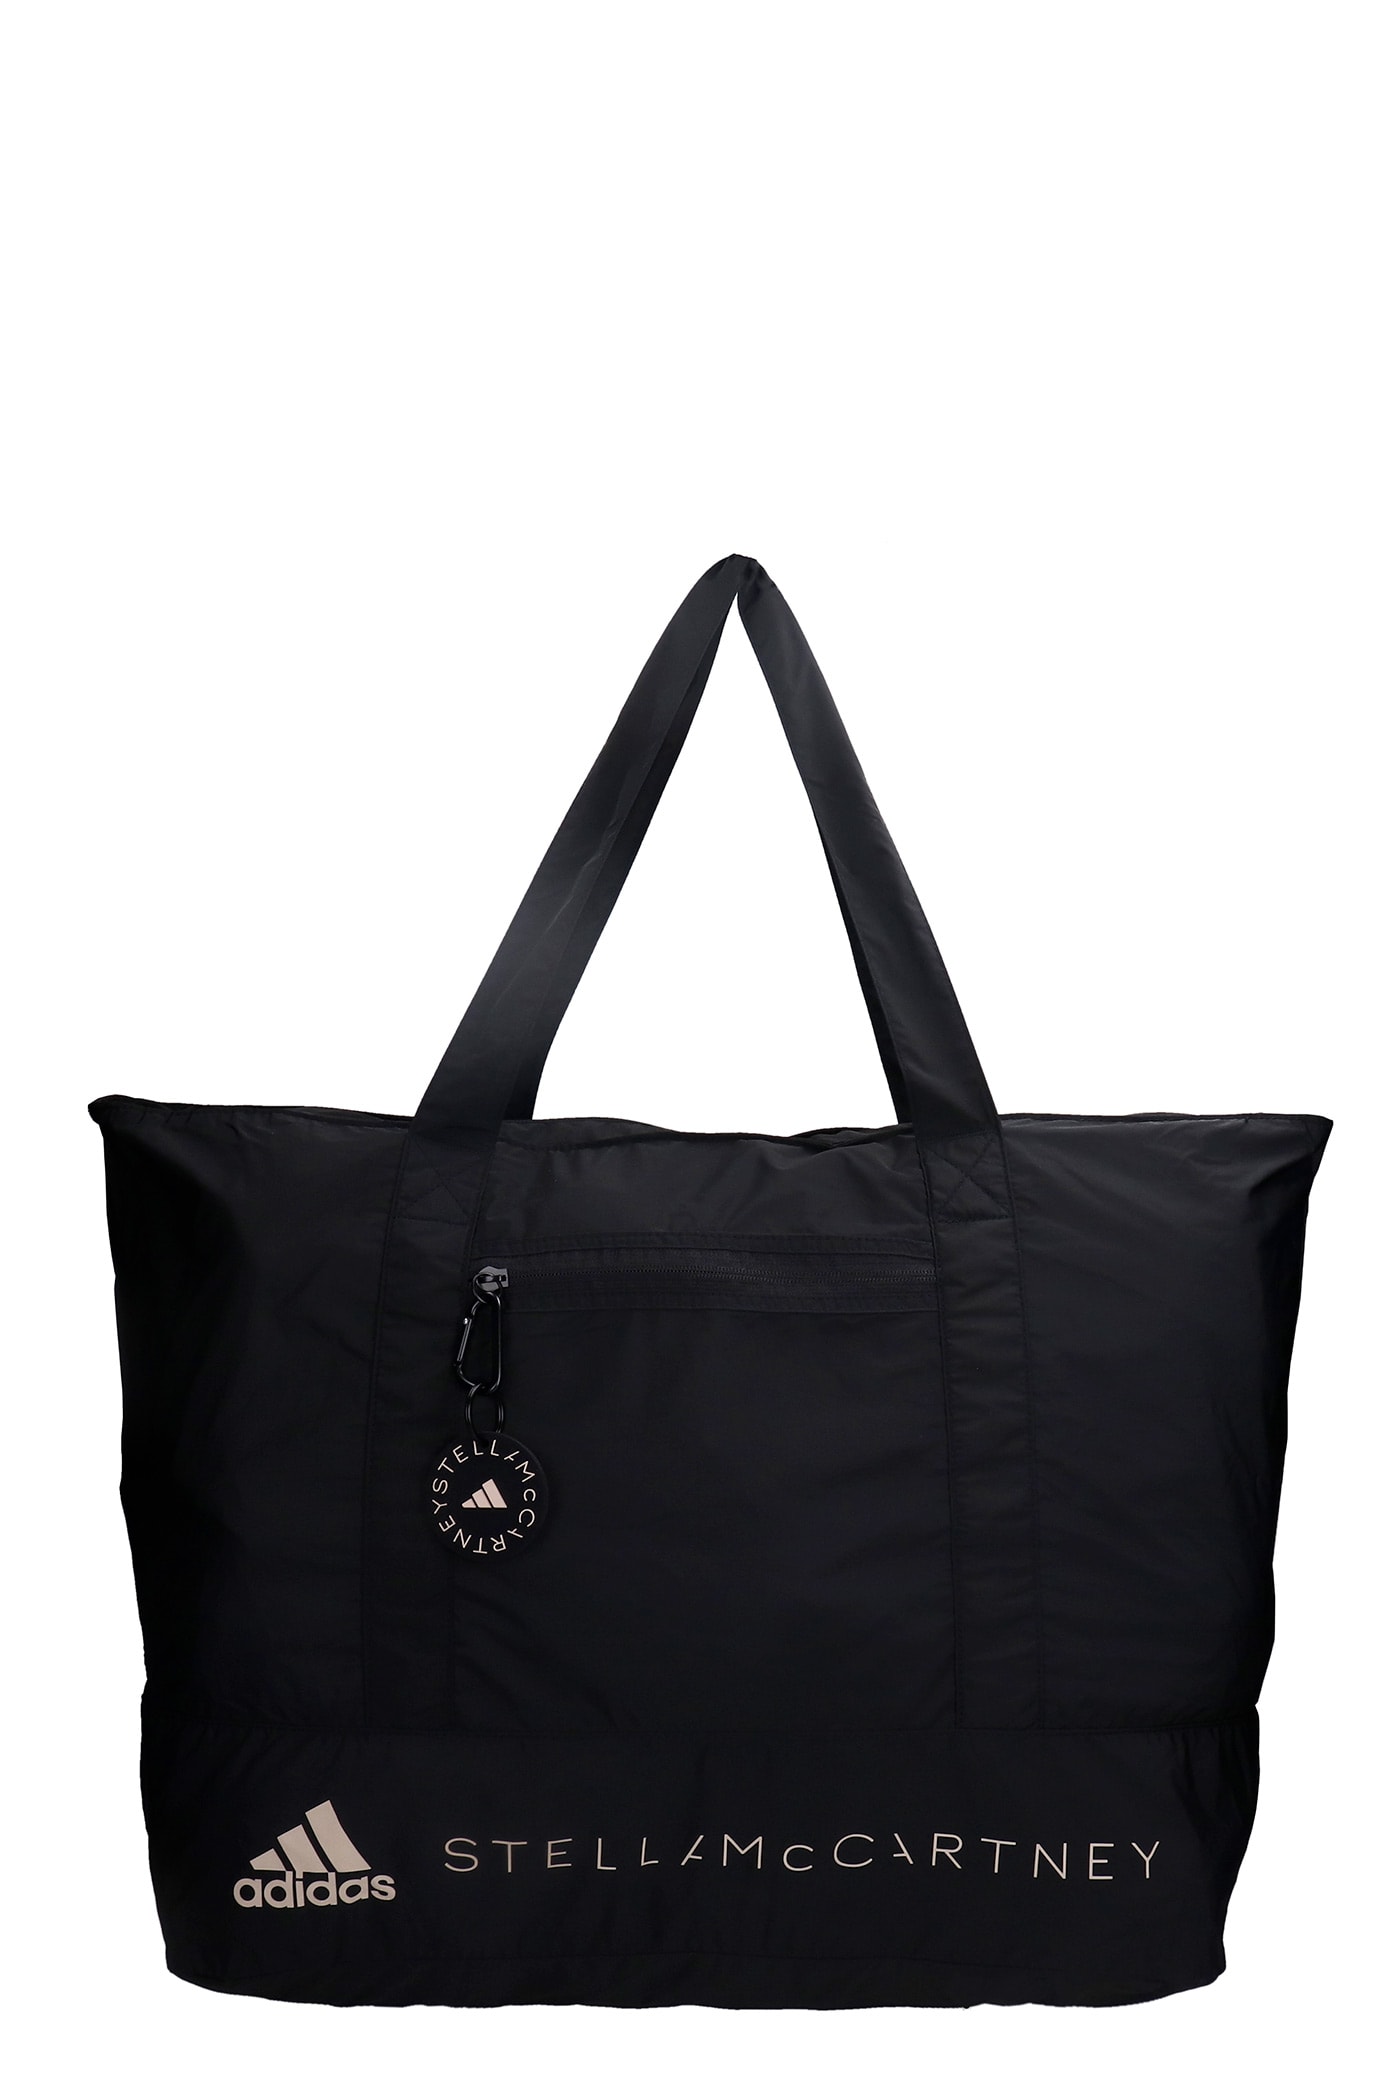 Adidas By Stella Mccartney Tote In Black Synthetic Fibers